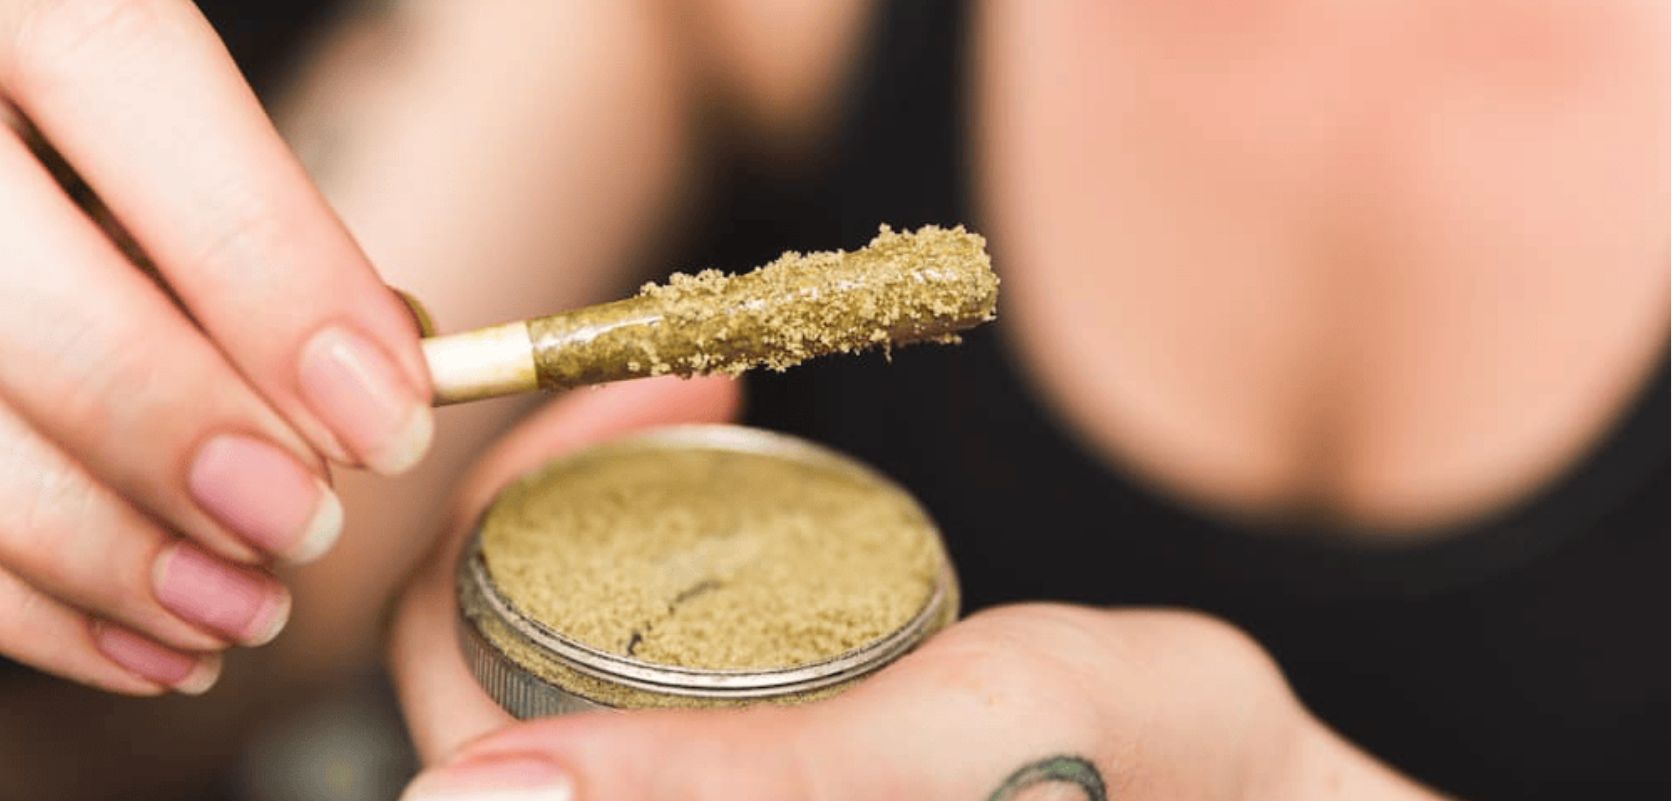 Keef is one of the most versatile weed products. Now that you have collected your pile of THC crystals or bought high-quality weed at our online weed dispensary, how do you use it?